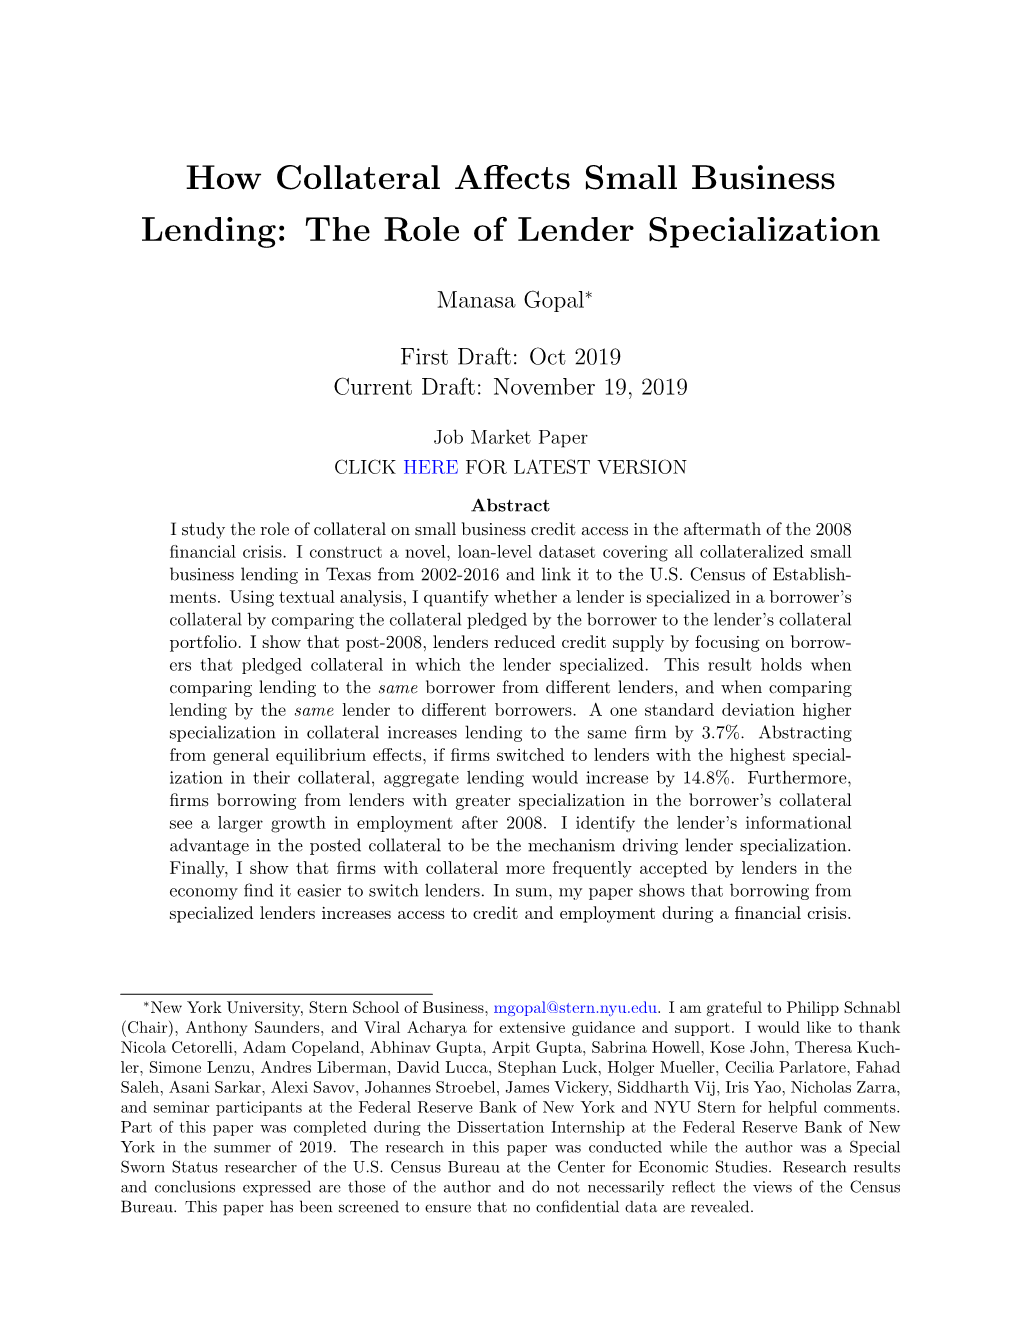 How Collateral Affects Small Business Lending: the Role of Lender